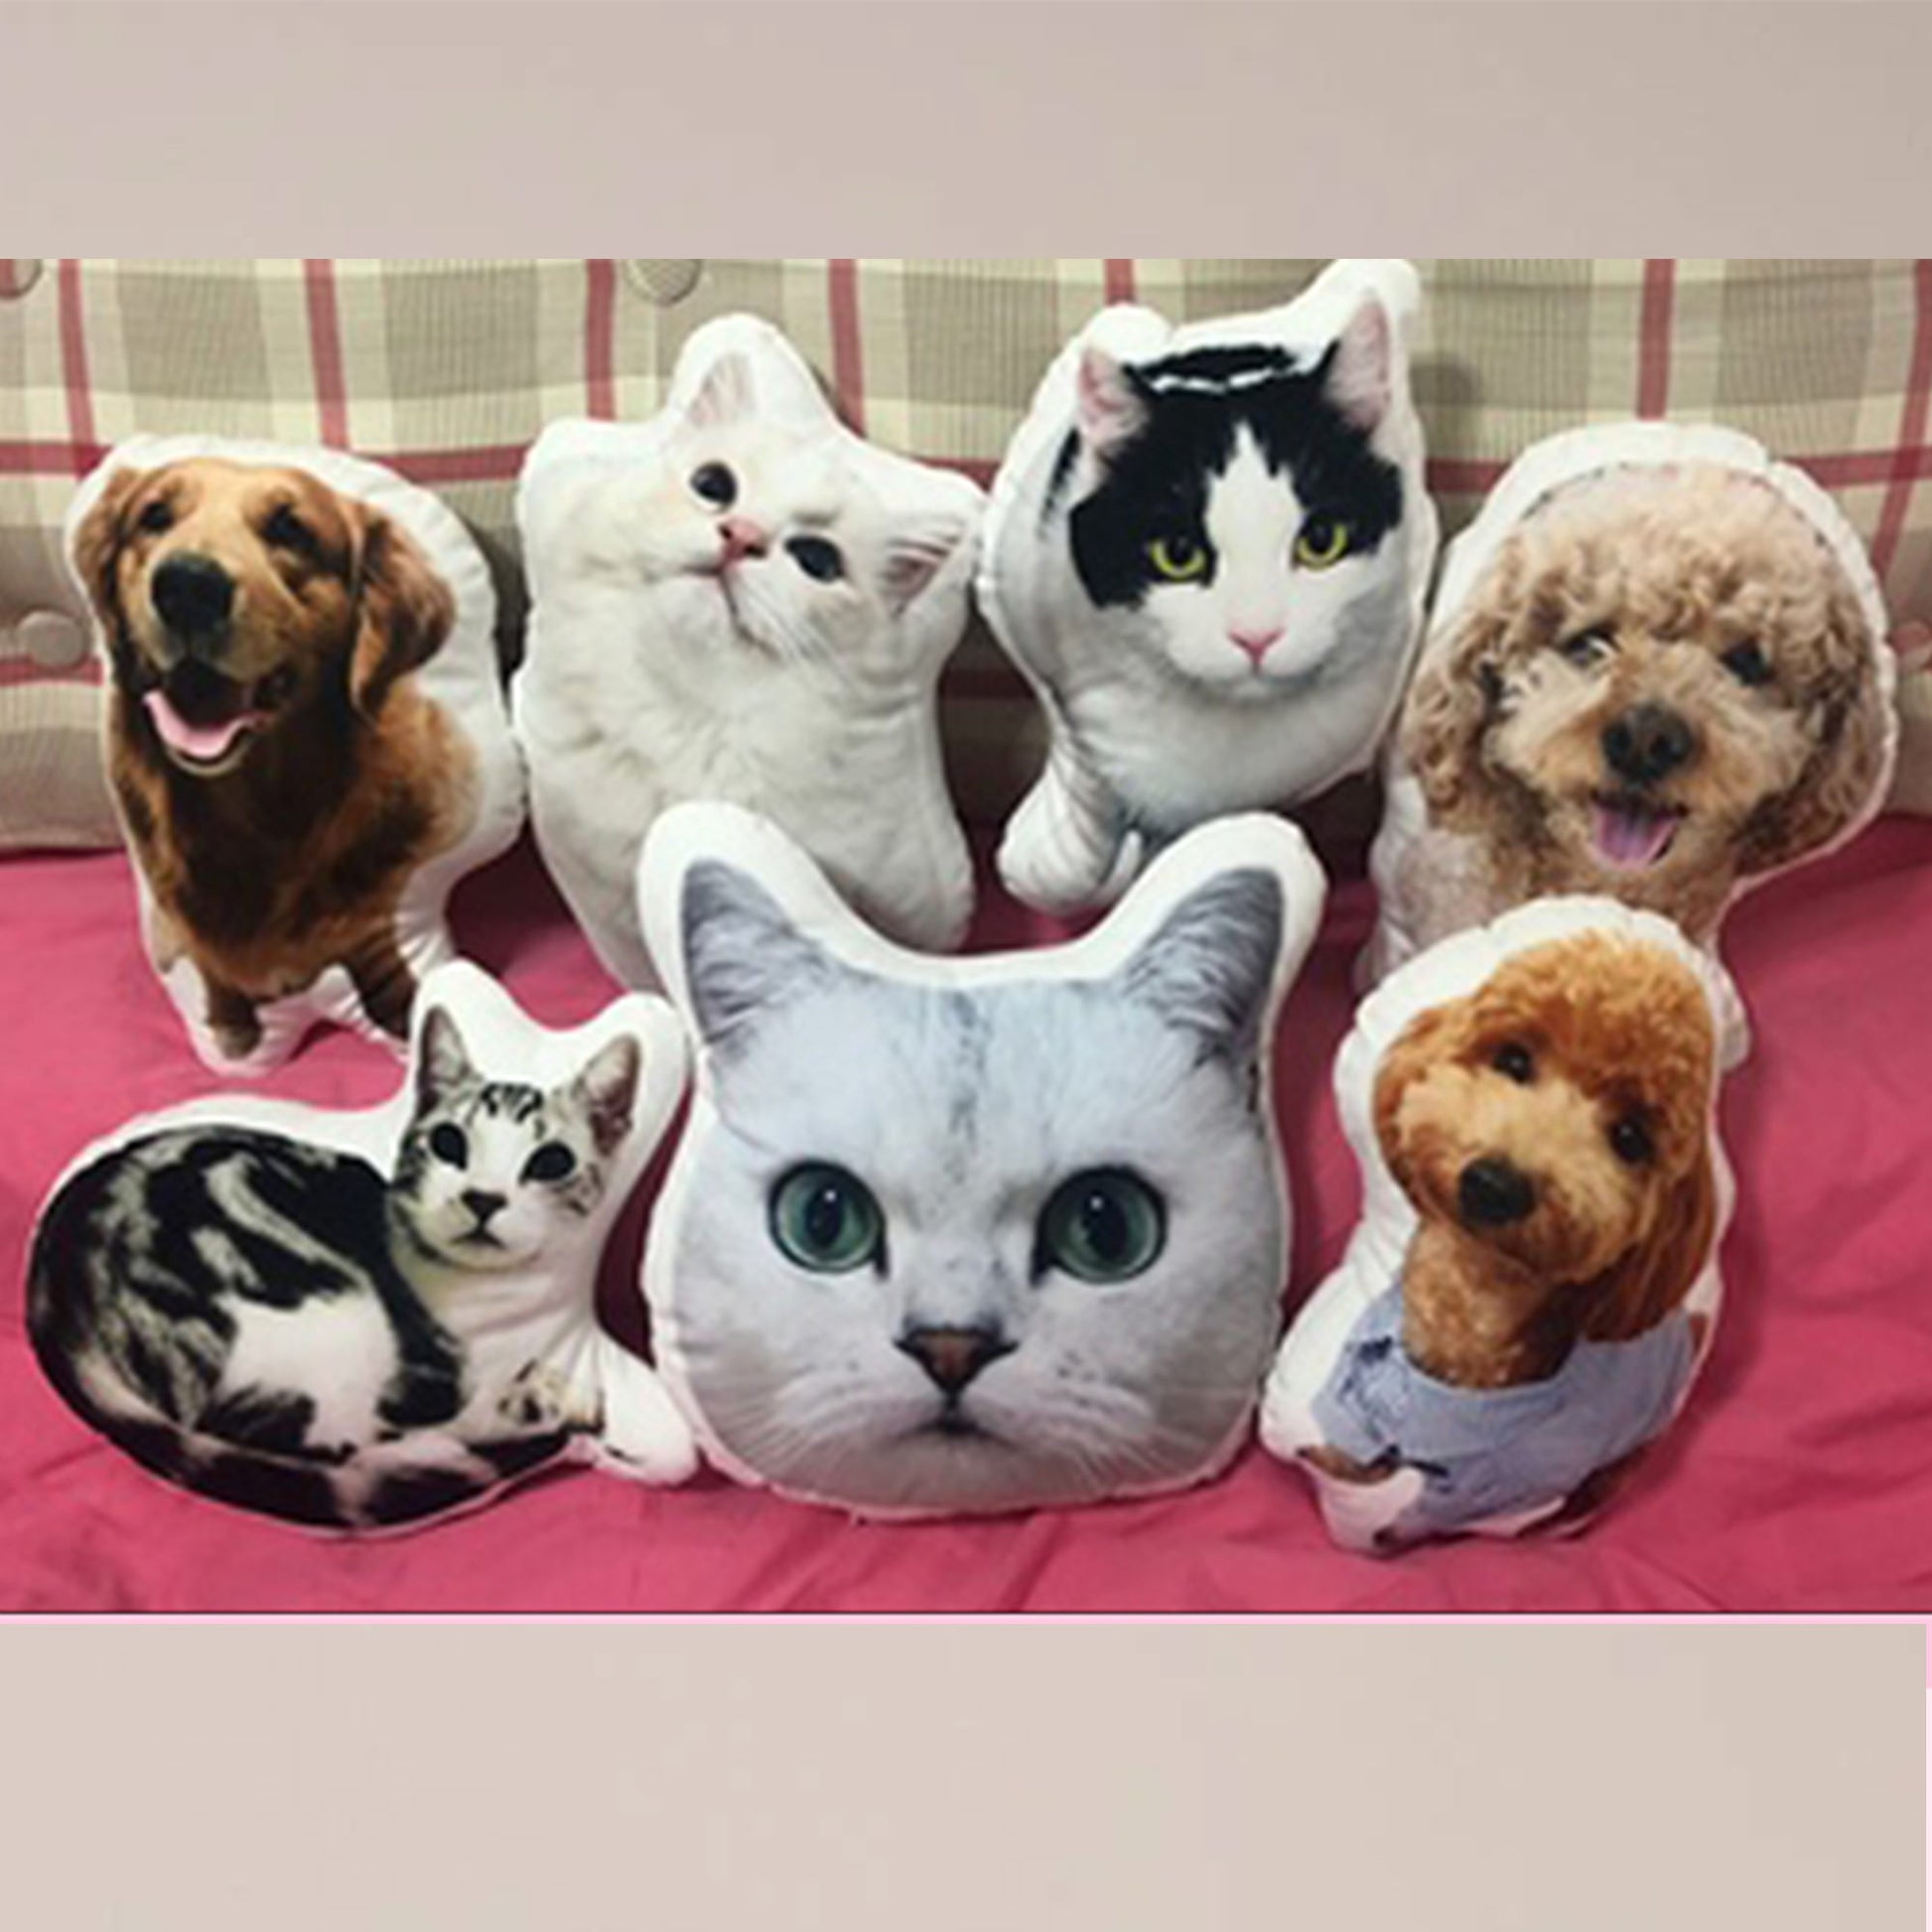 Personalized all-over print body pillows, showcasing adorable dogs and cats in various shapes, including cat and dog faces, beautifully displayed on a sofa.